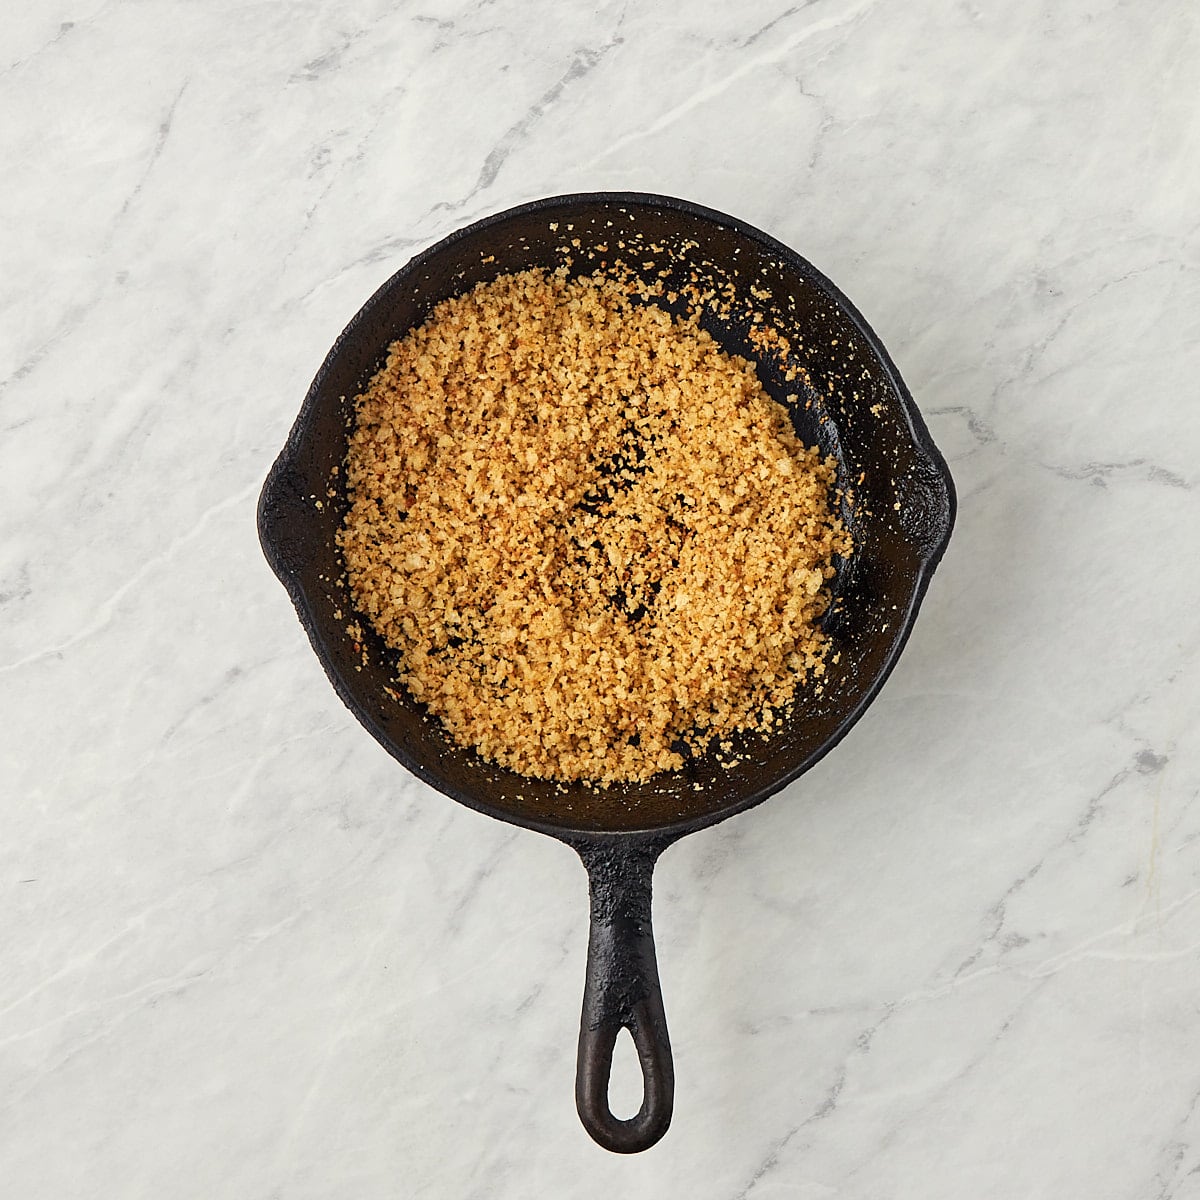 toasted panko bread crumbs in a cast iron skillet.